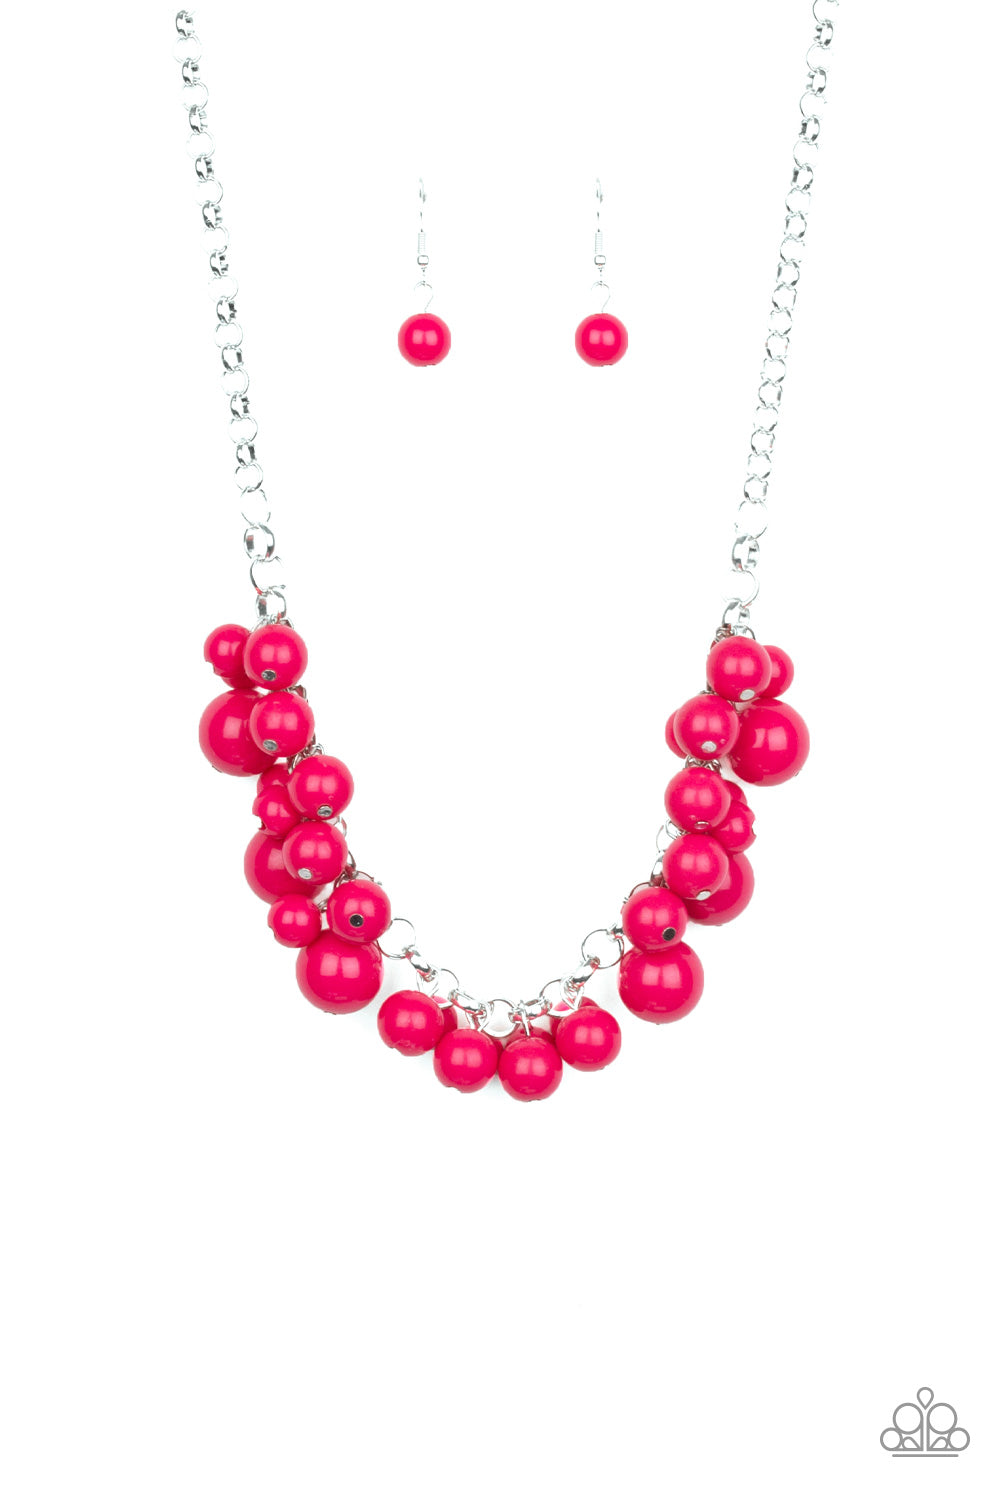 Walk This BROADWAY Pink Necklace - Paparazzi Accessories  A collection of bubbly pink beads swings from the bottom of a shimmery silver chain, creating a vivacious fringe below the collar. Features an adjustable clasp closure.  All Paparazzi Accessories are lead free and nickel free!  Sold as one individual necklace. Includes one pair of matching earrings.